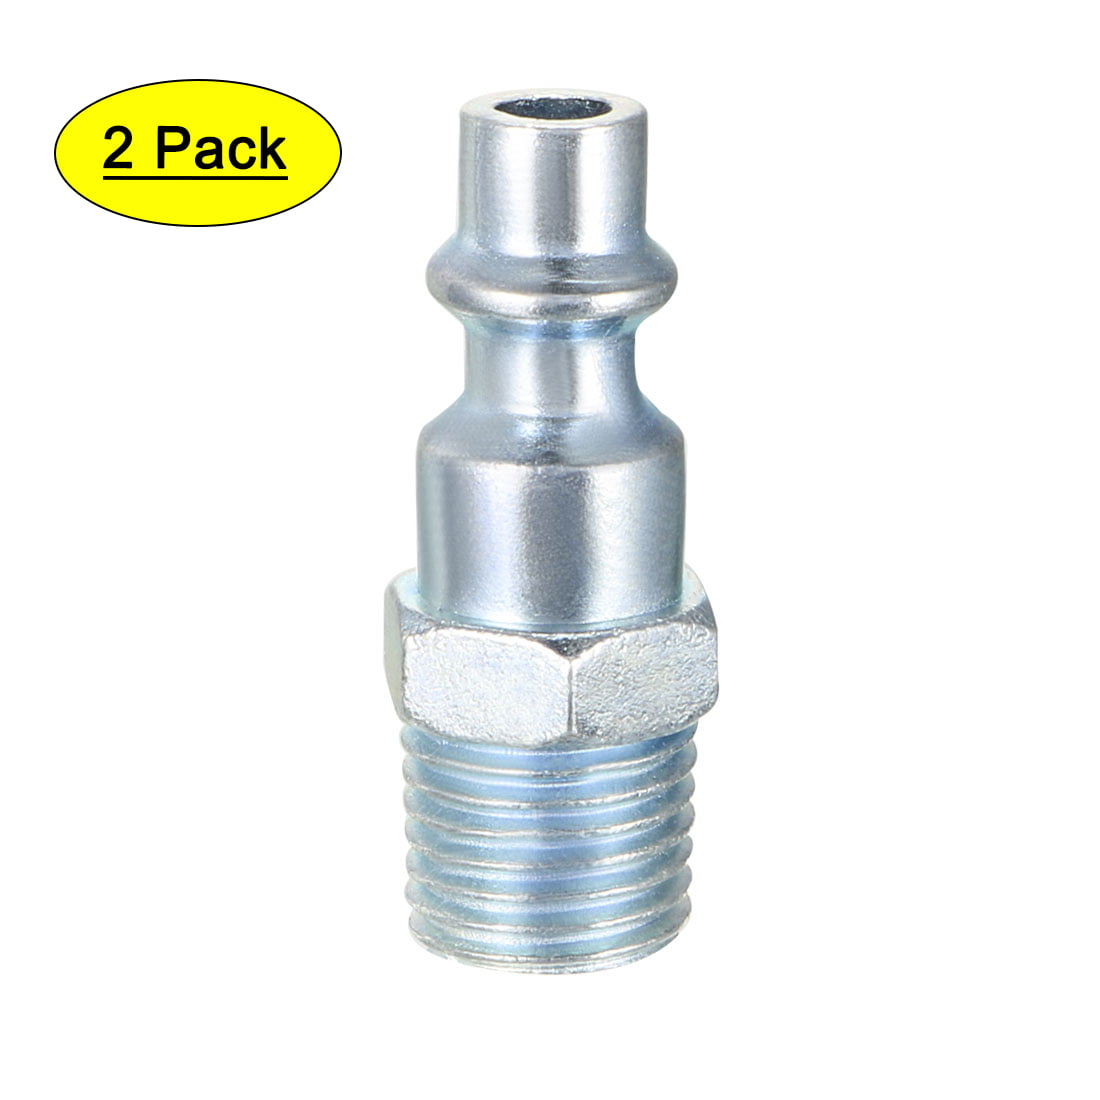 12 Pack Air Hose Fittings Coupling 1/4" x 1/4" NPT Male Pipe Brass Fitting 